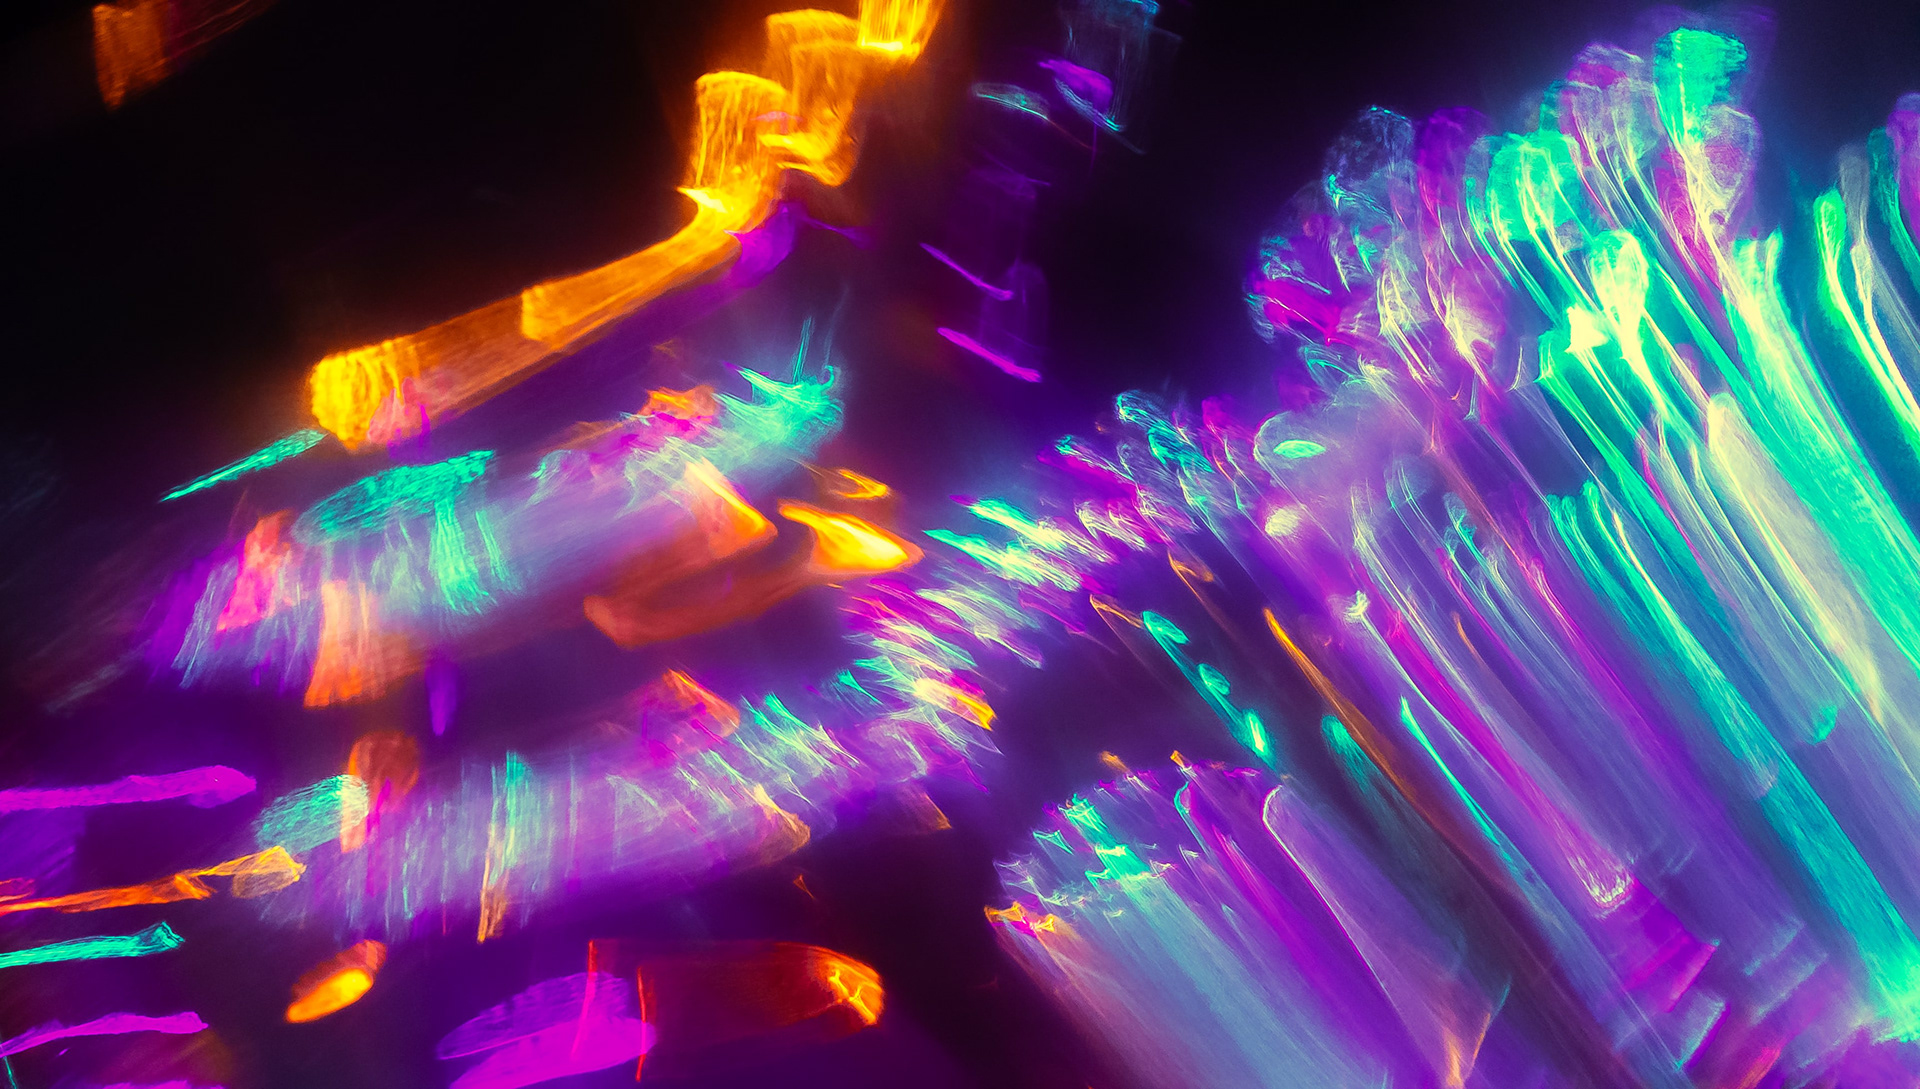 Photographing Lights Through Glassware Produces Psychedelic Results ...